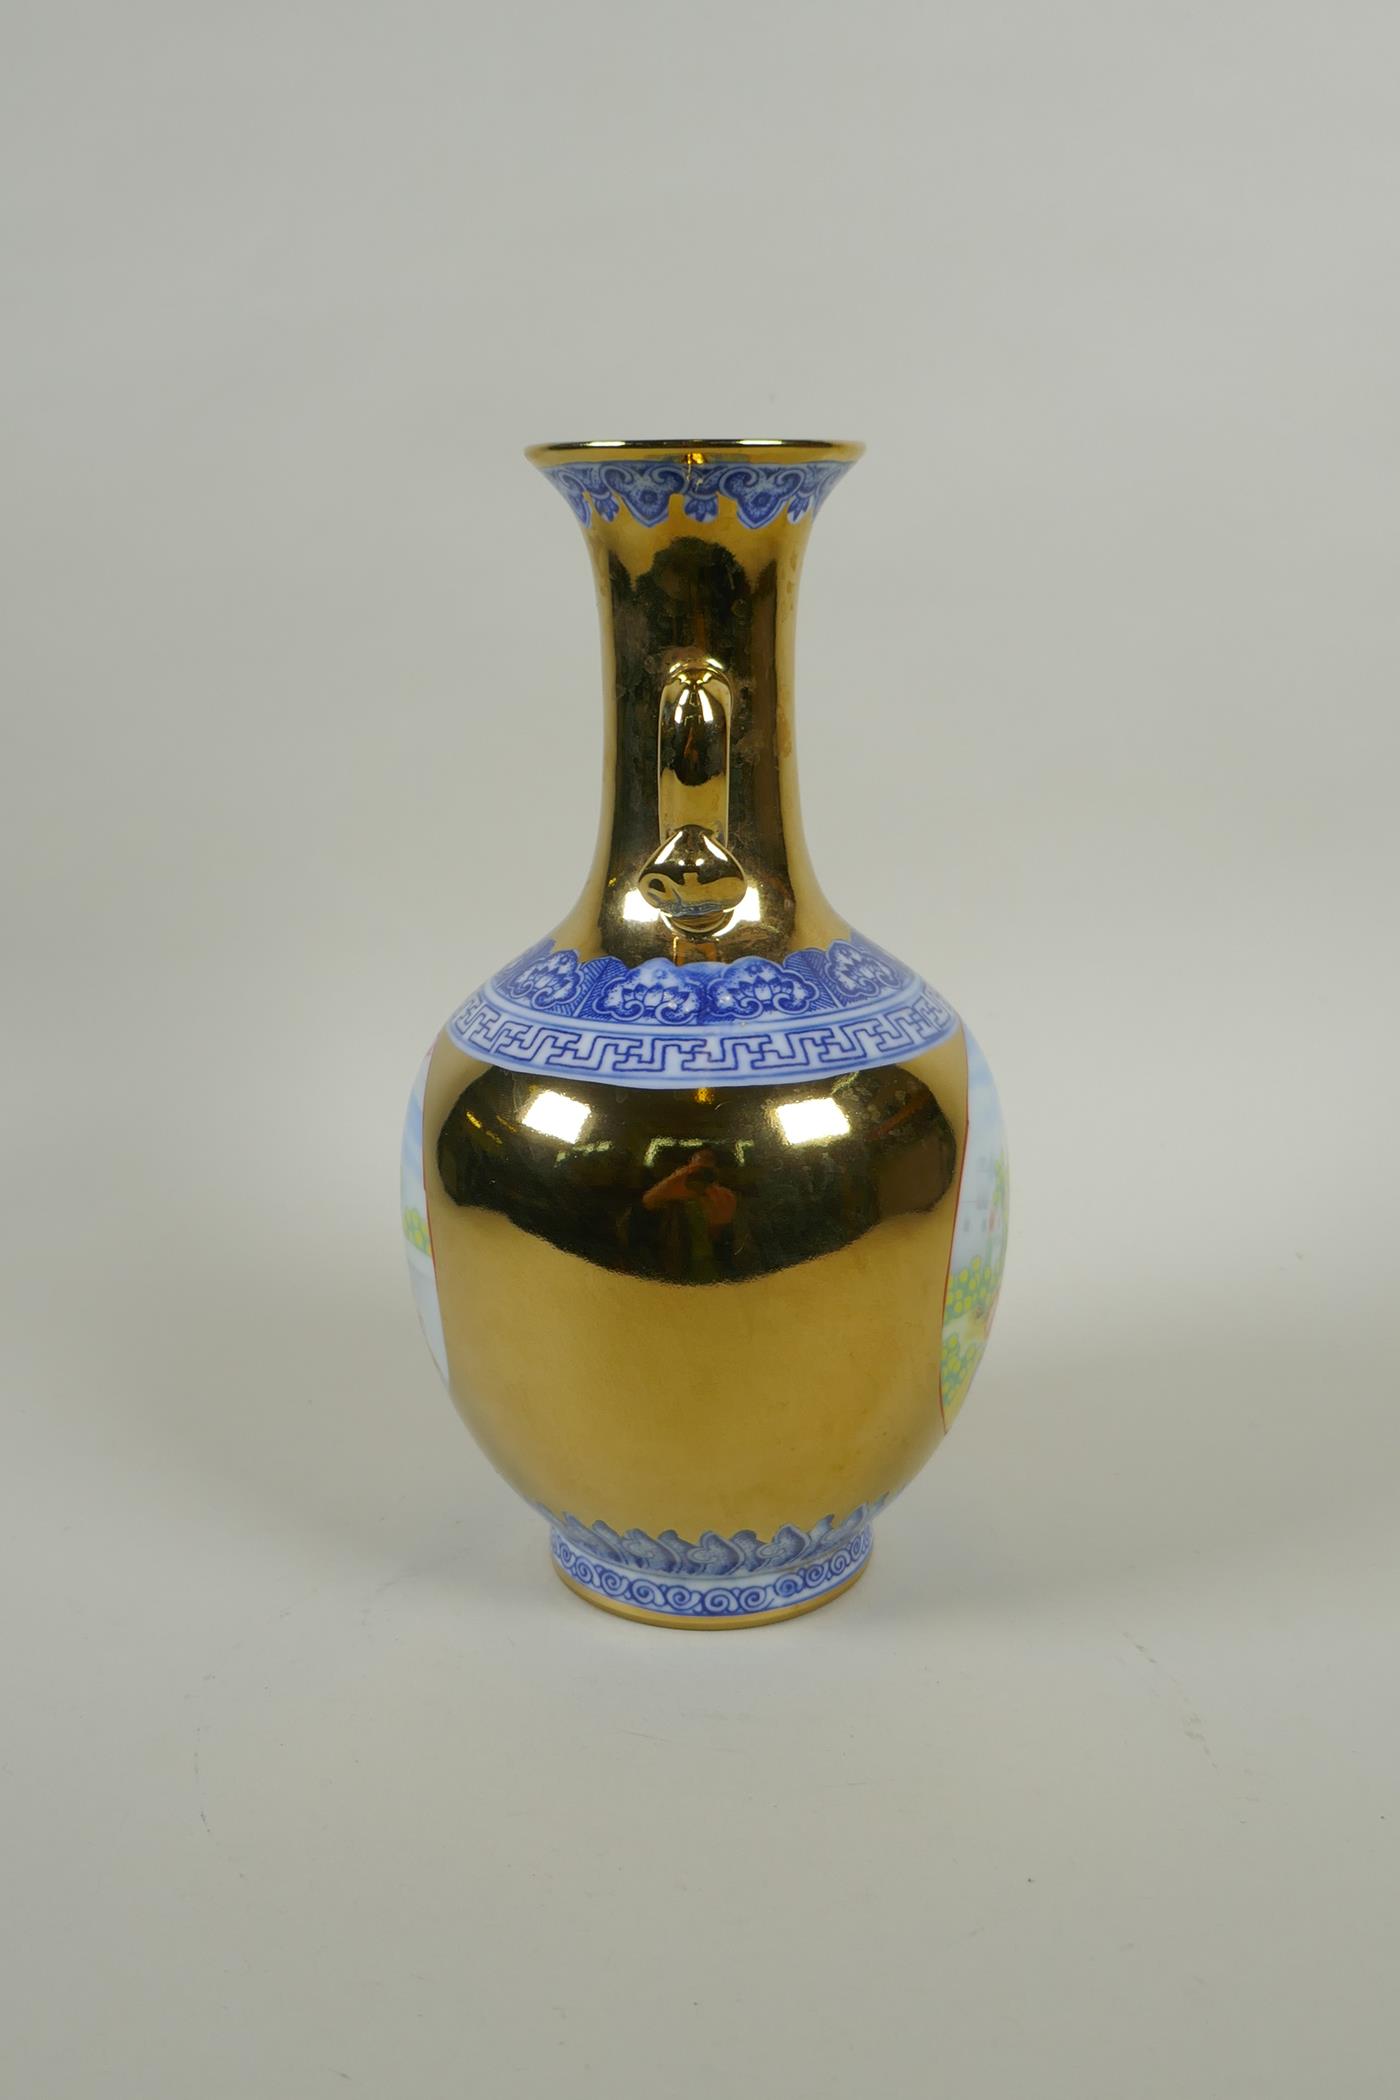 A Chinese gilt lustre and polychrome porcelain vase with two handles and decorative panels depicting - Image 3 of 5